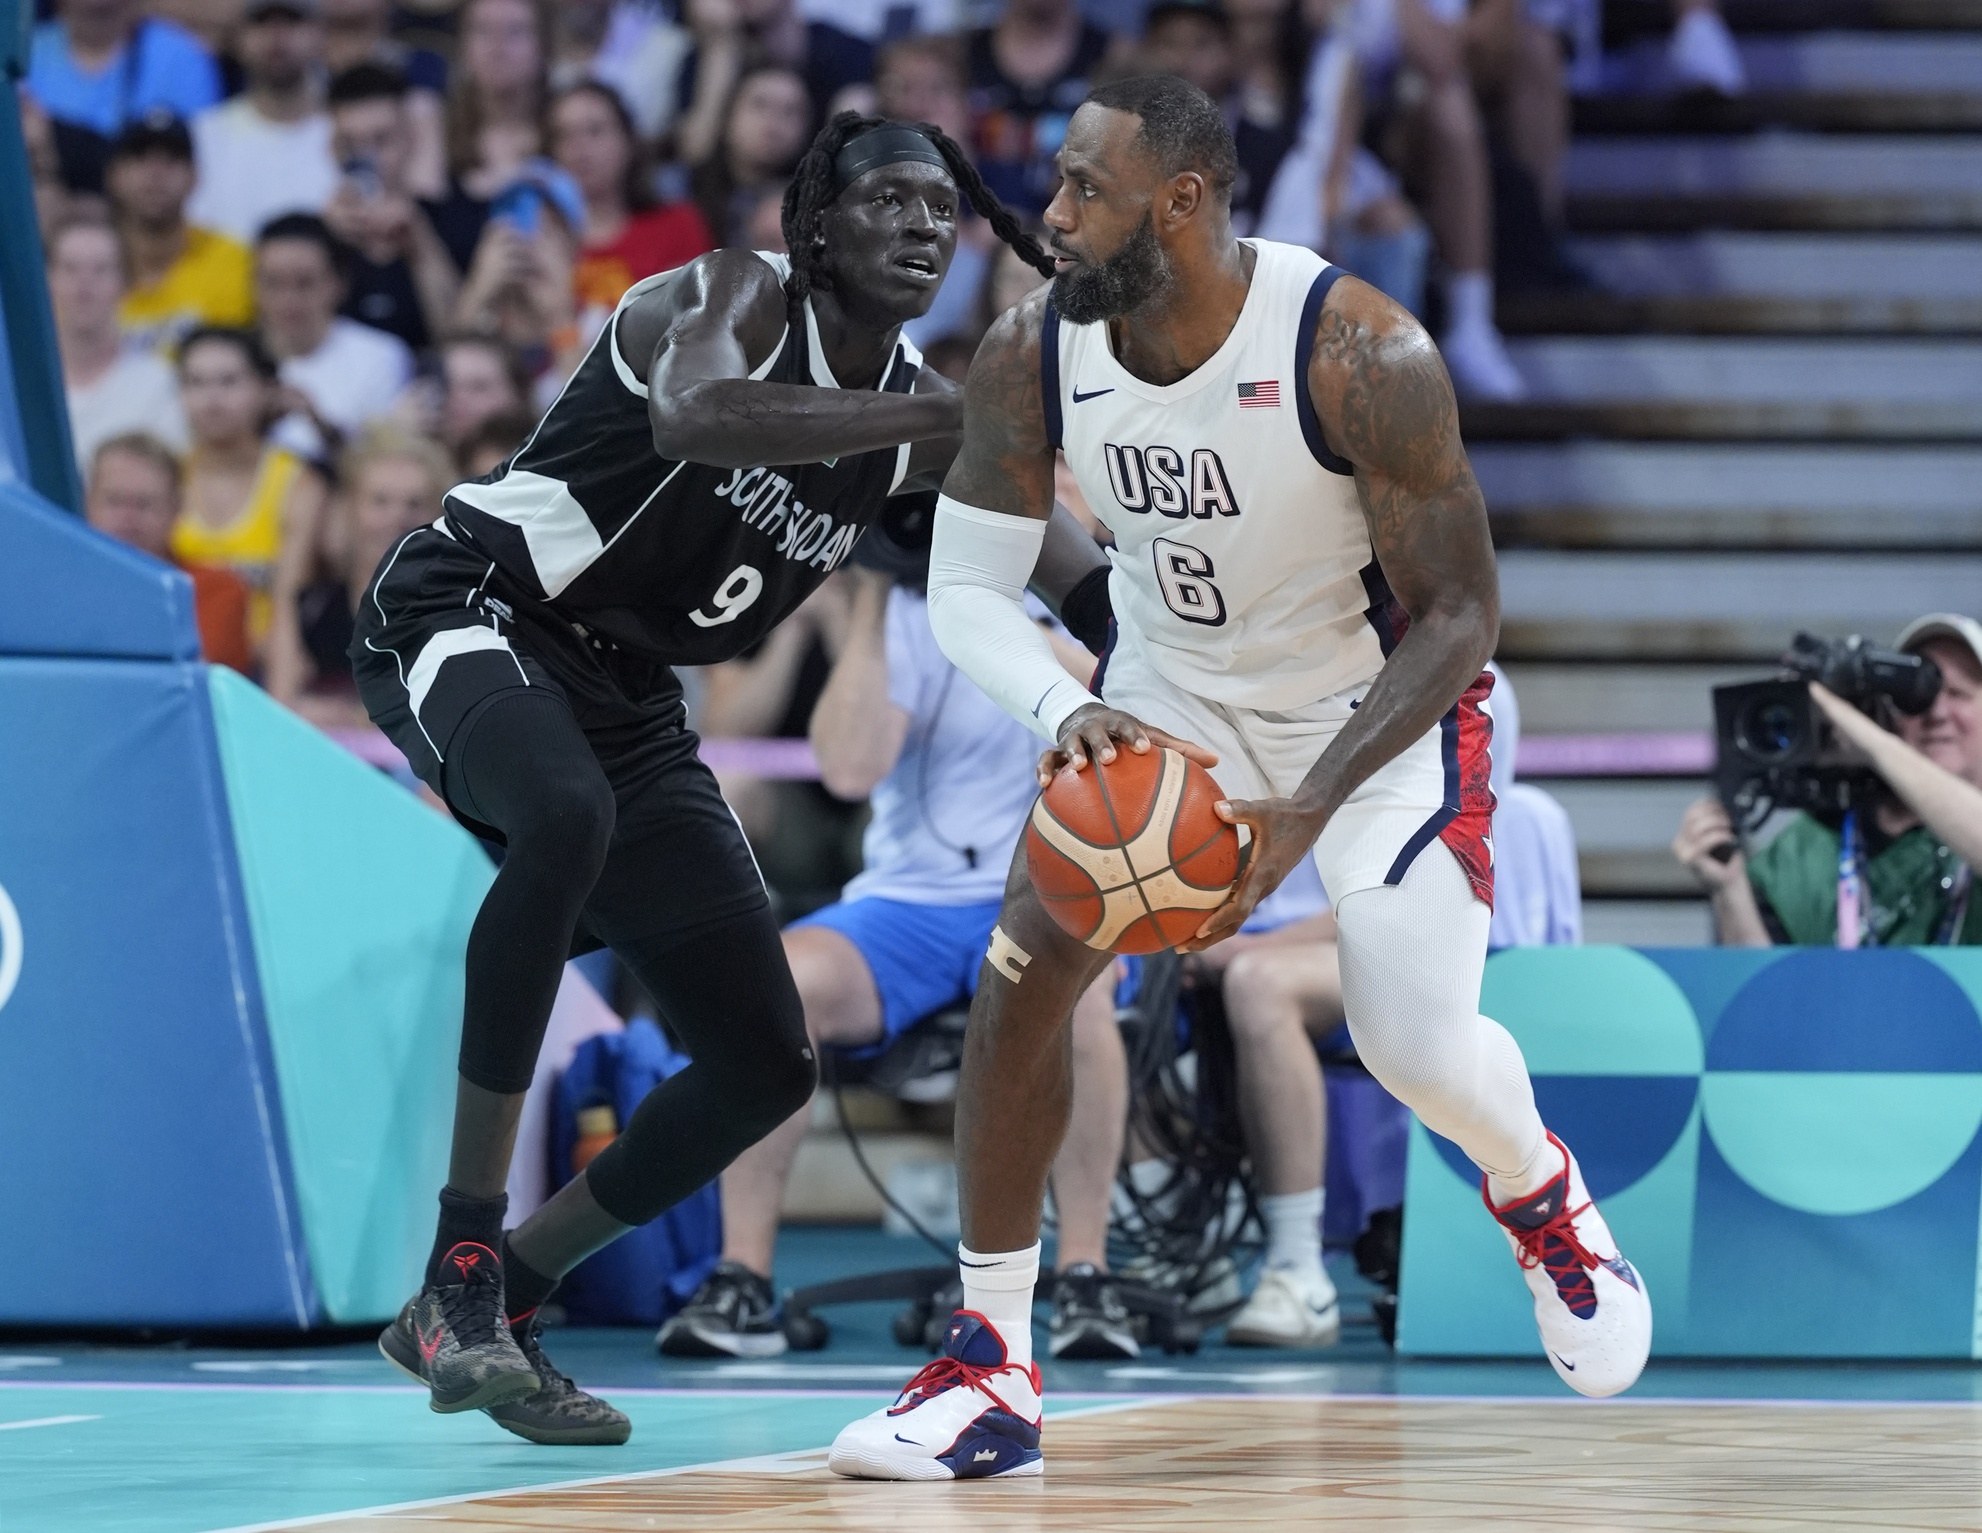 Jul 31, 2024; Villeneuve-d'Ascq, France; United States guard Lebron James (6) dribbles against South Sudan power forward Wenyen Gabriel (9) in the second quarter during the Paris 2024 Olympic Summer Games at Stade Pierre-Mauroy. Mandatory Credit: John David Mercer-USA TODAY Sports